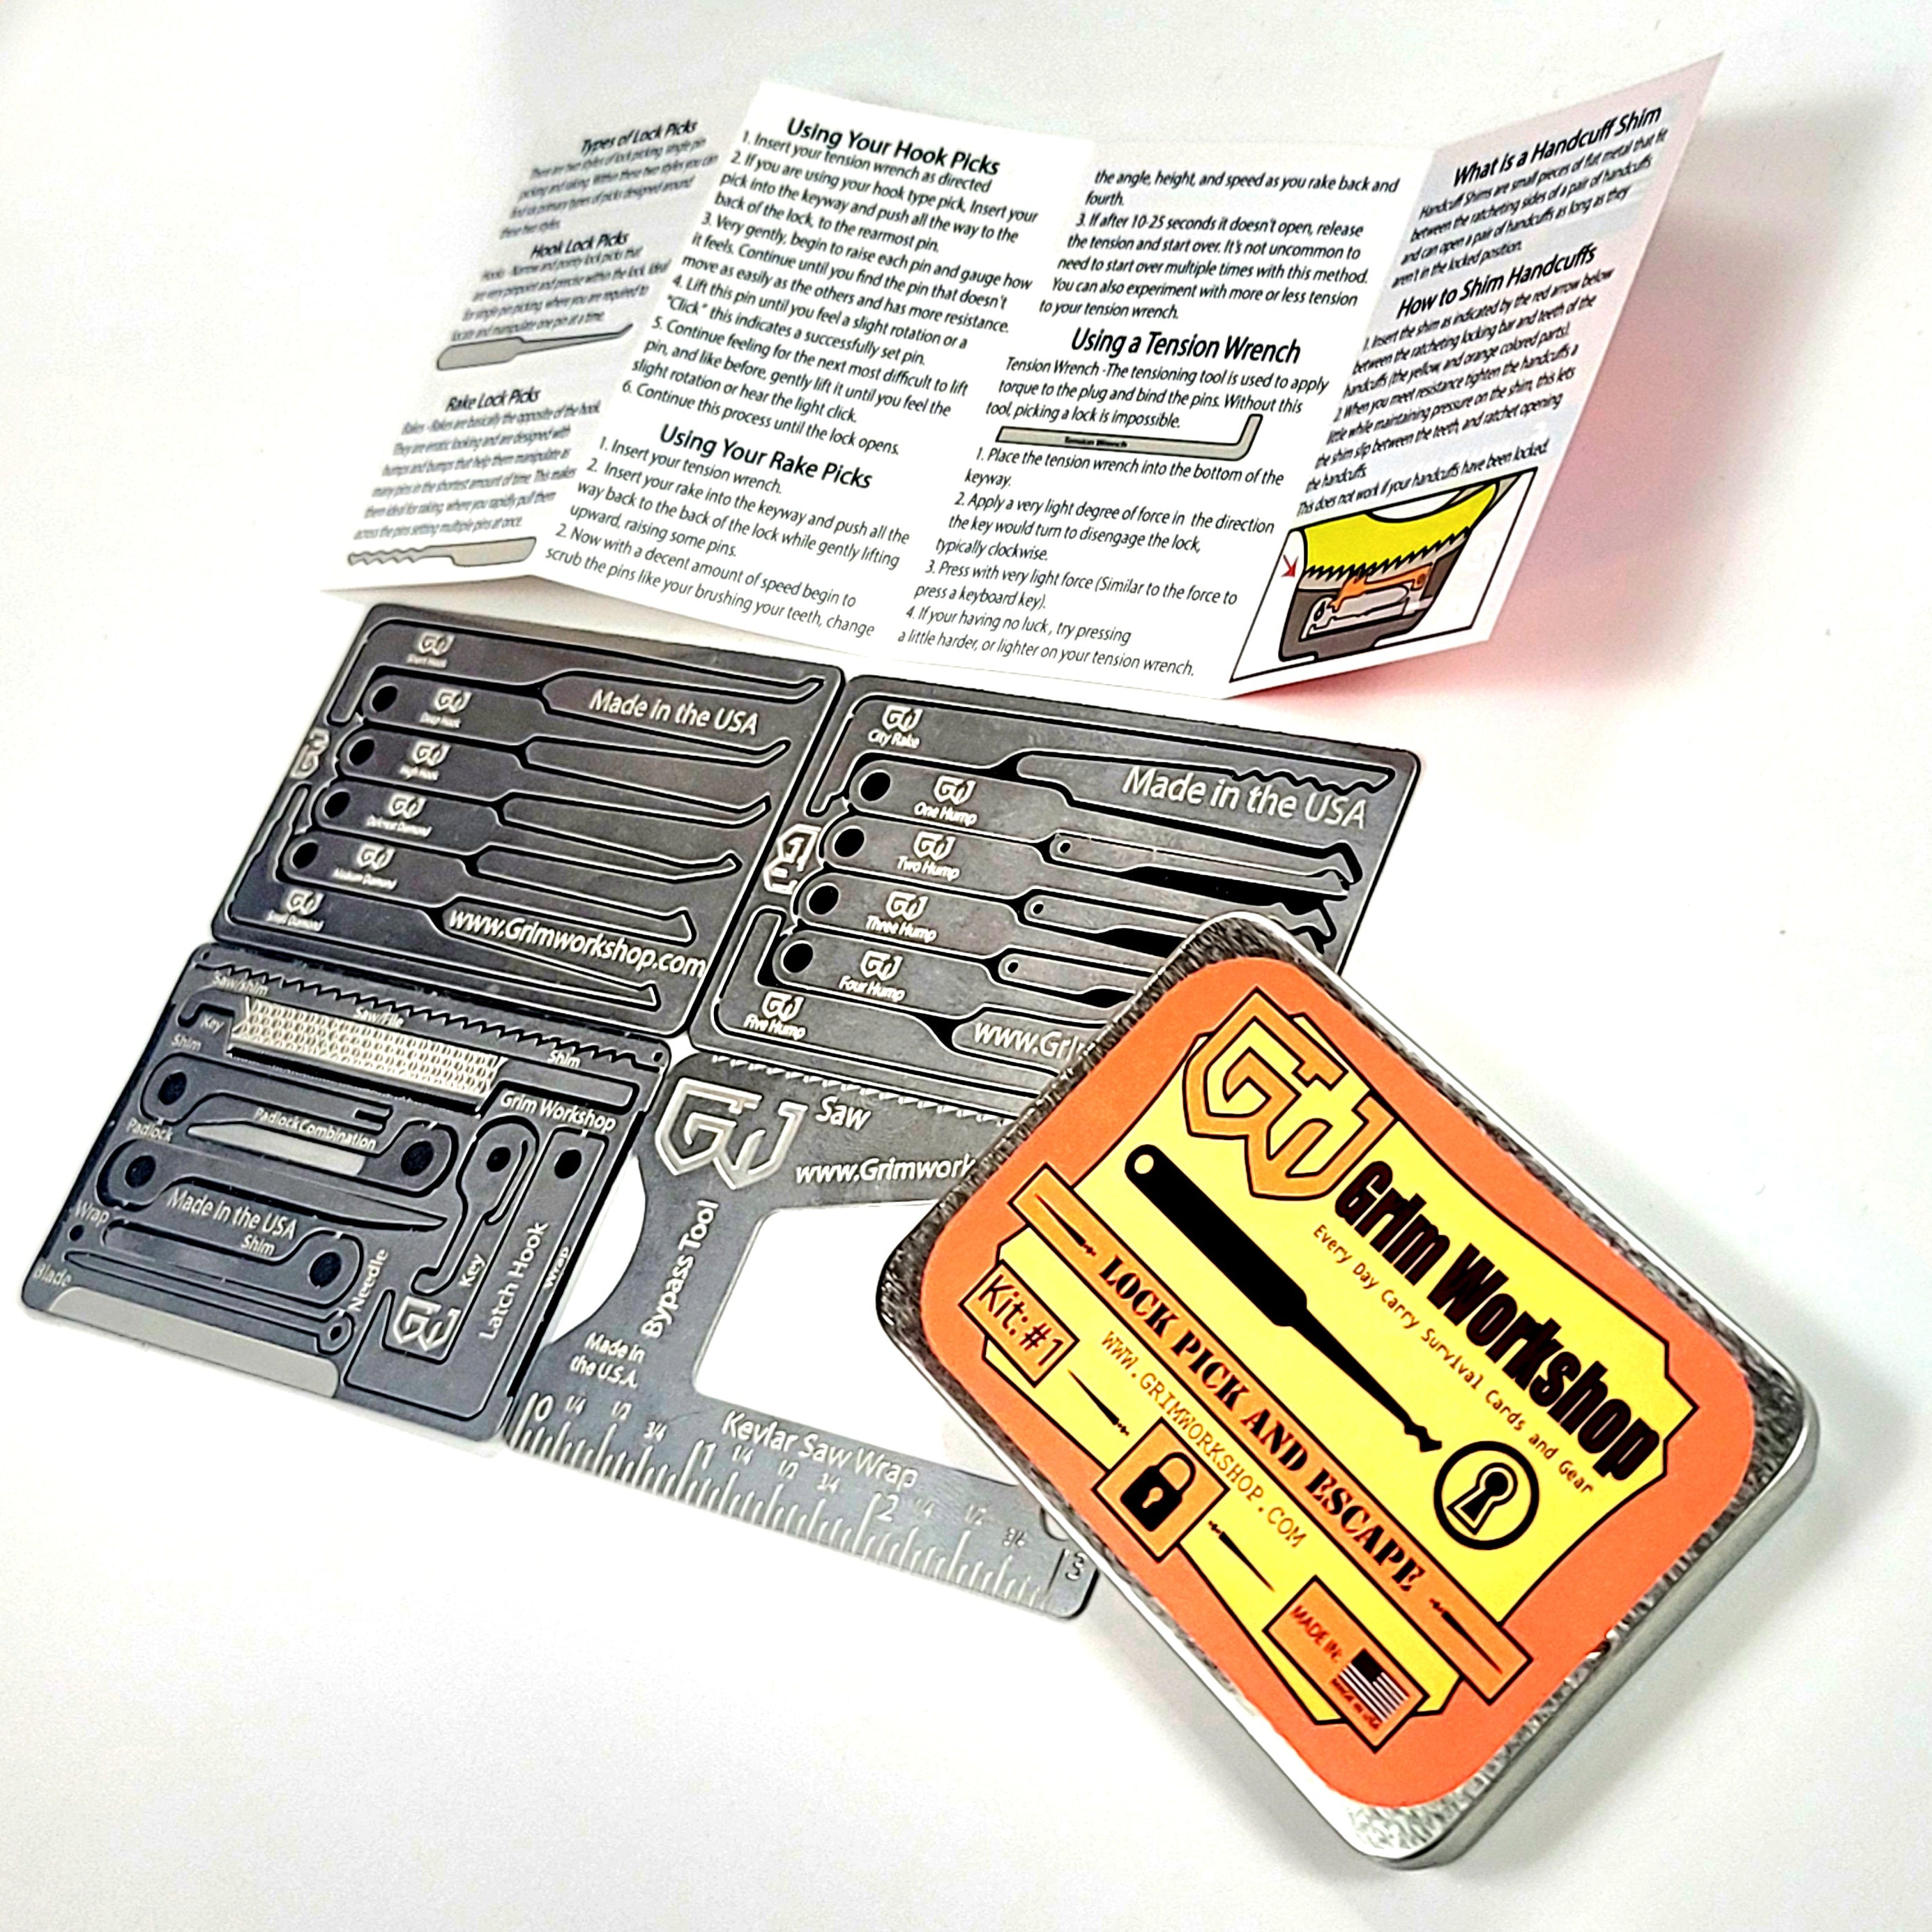 the edc sere kit is the best urban survival gere. Made up of our sere cards which are urban survival cards this is the urban survival kit.